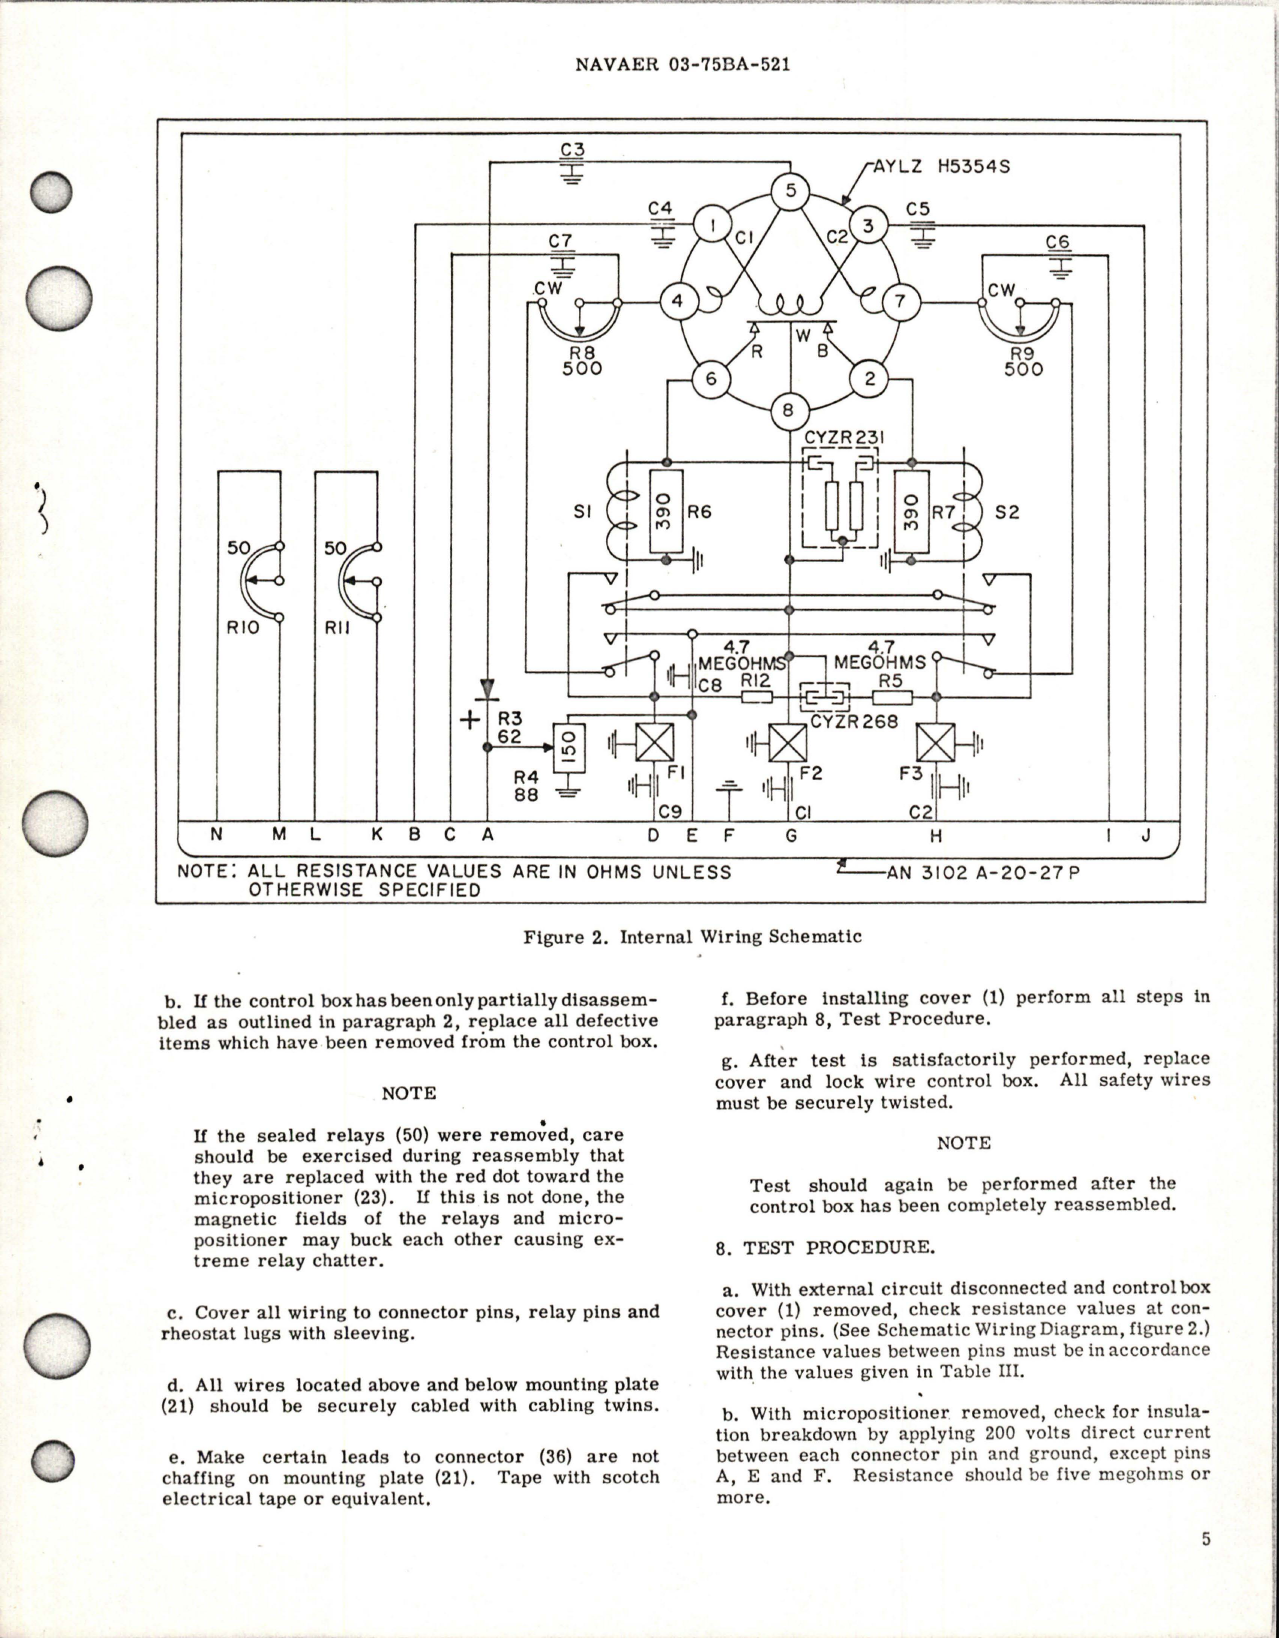 Sample page 5 from AirCorps Library document: Overhaul Instructions with Parts Breakdown for Control Box Remote Throttle Positioning - CYLZ 4246-1